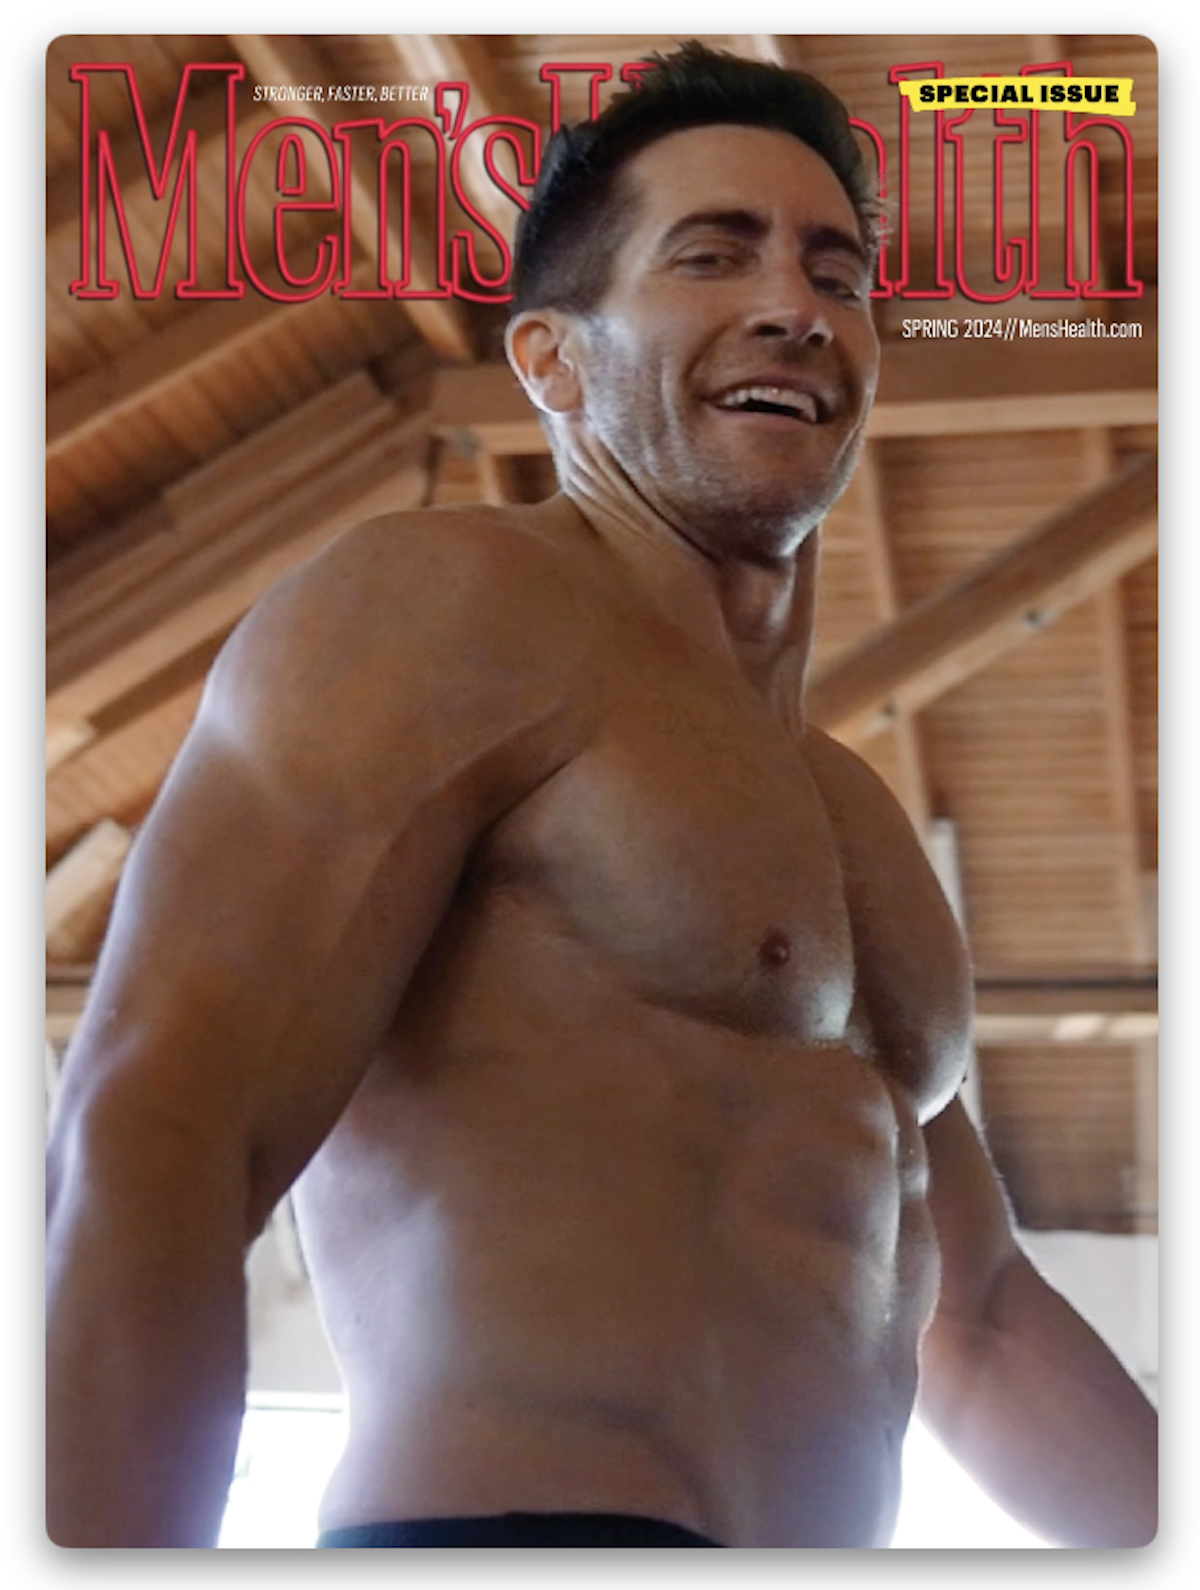 Jake Gyllenhaal's "Body by Jake"/ A Transformation for the Ages in Road House